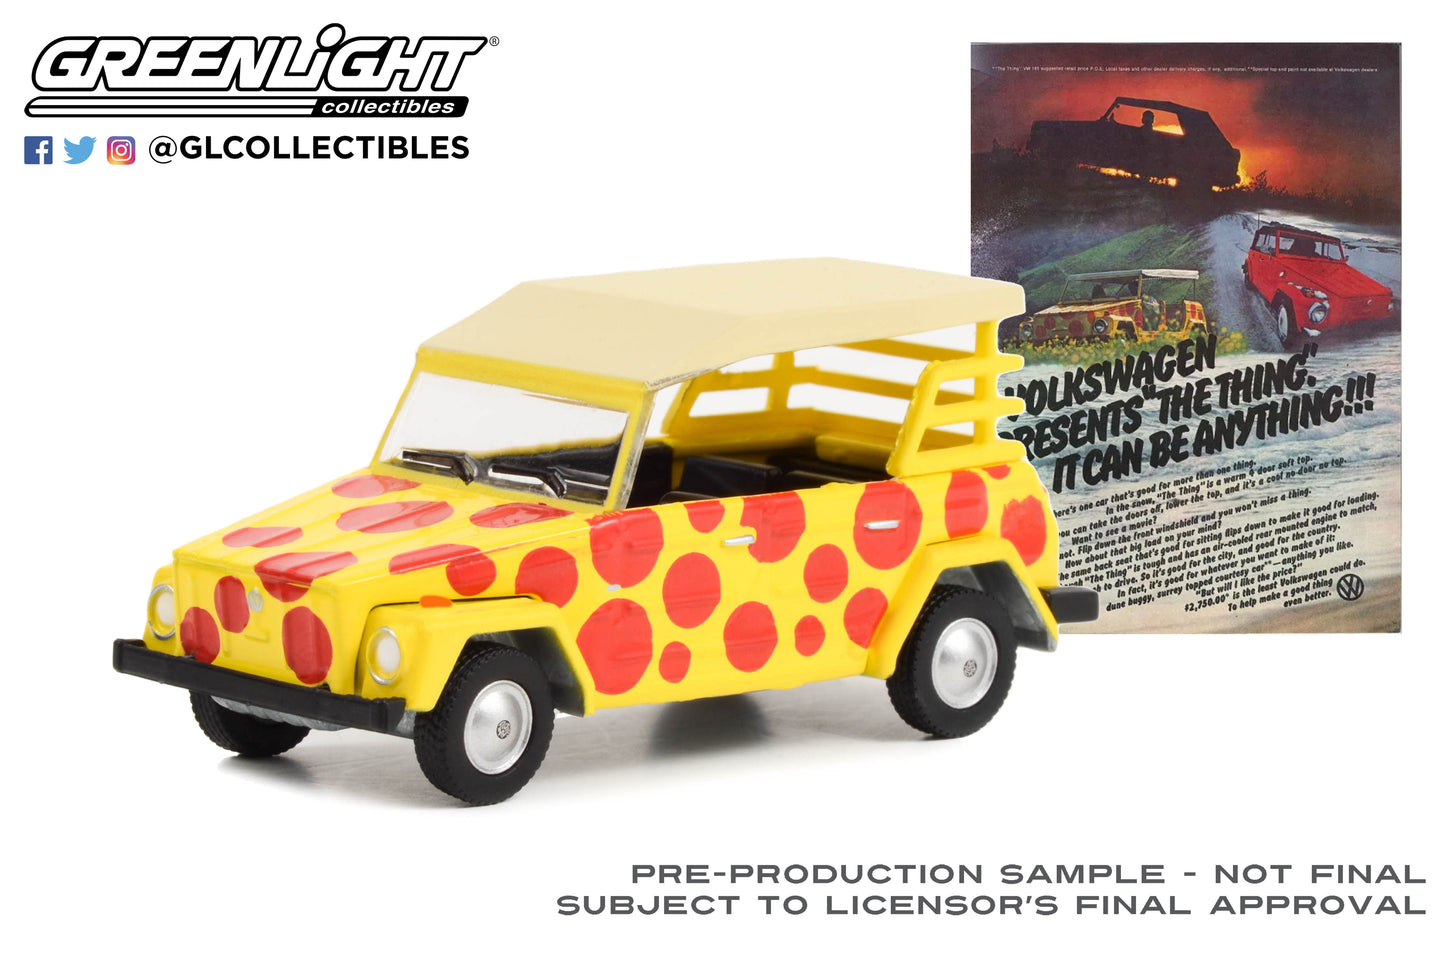 GreenLight 1:64 Vintage Ad Cars Series 8 - 1974 Volkswagen Thing (Type 181) “Volkswagen Presents The Thing. It Can Be Anything!!!” 39110-C